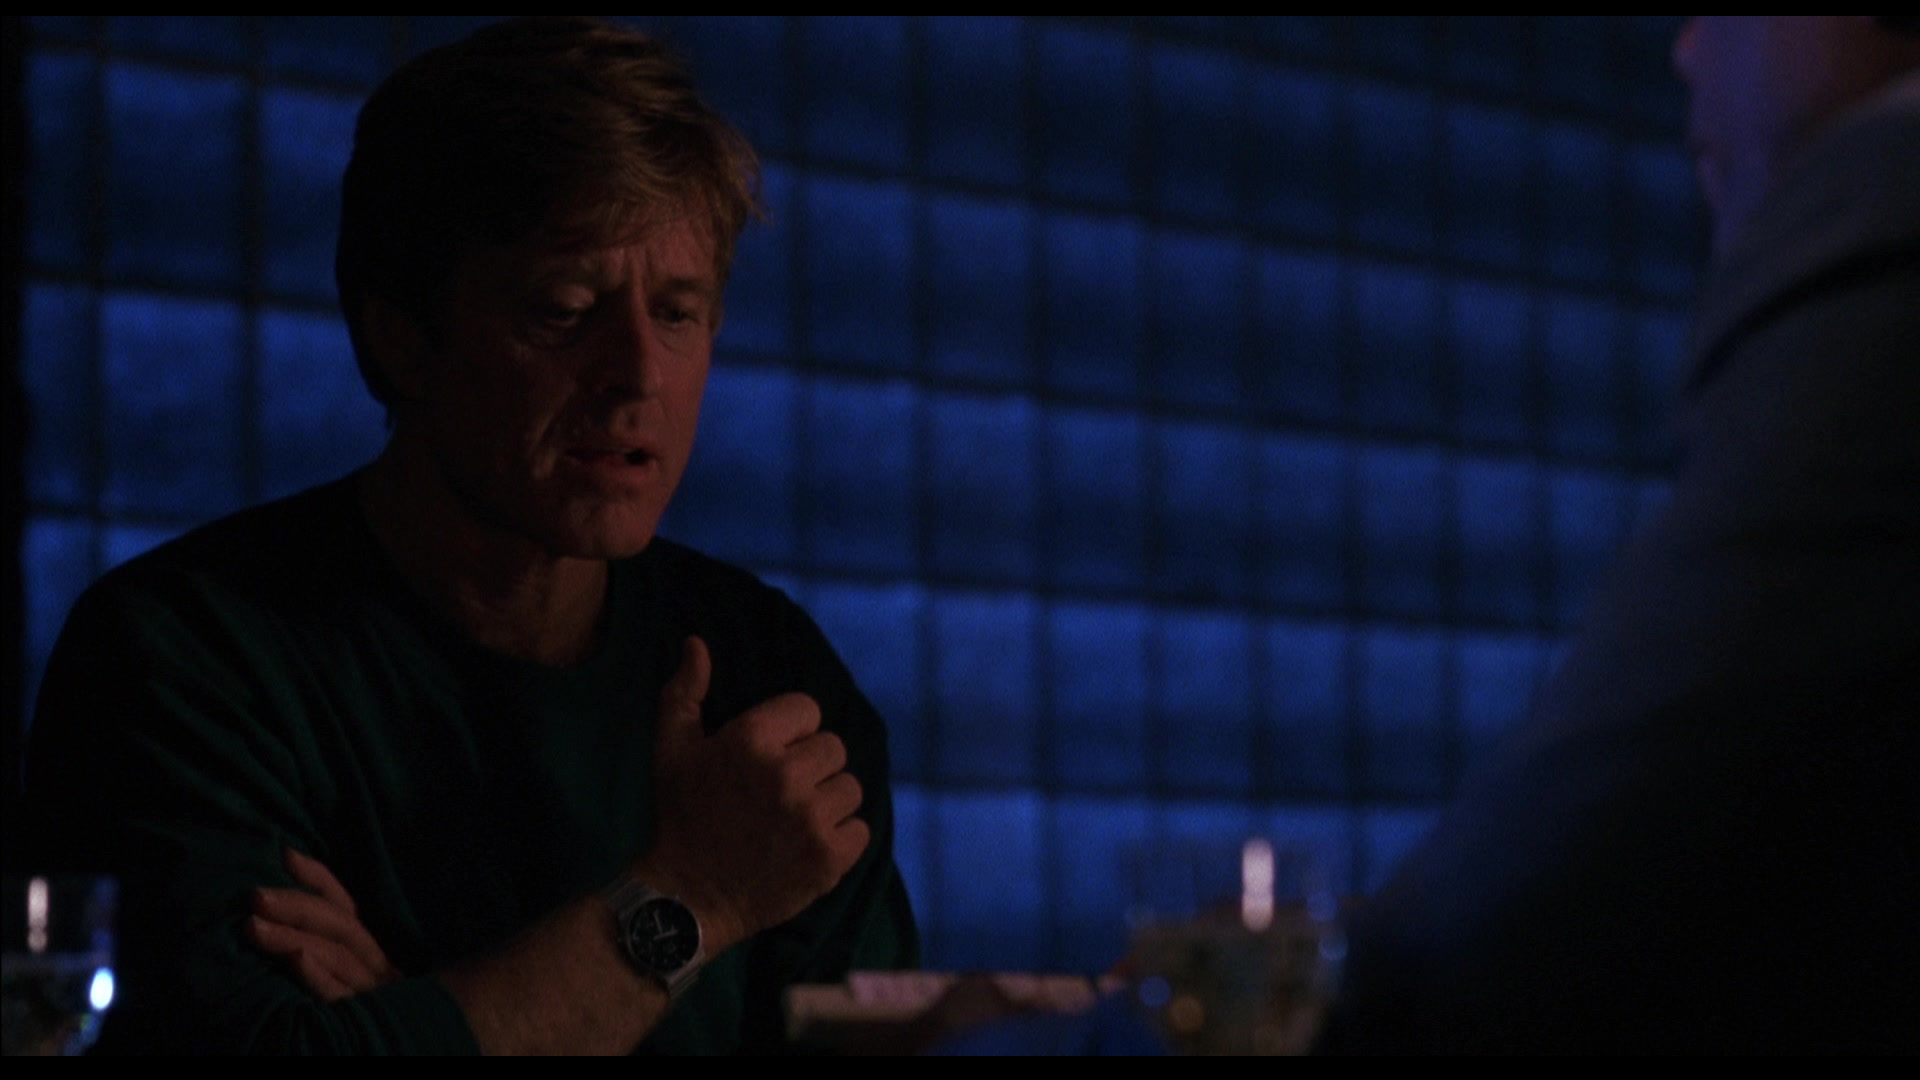 Seiko Watch (7A28-7049) Worn By Robert Redford In Sneakers (1992)